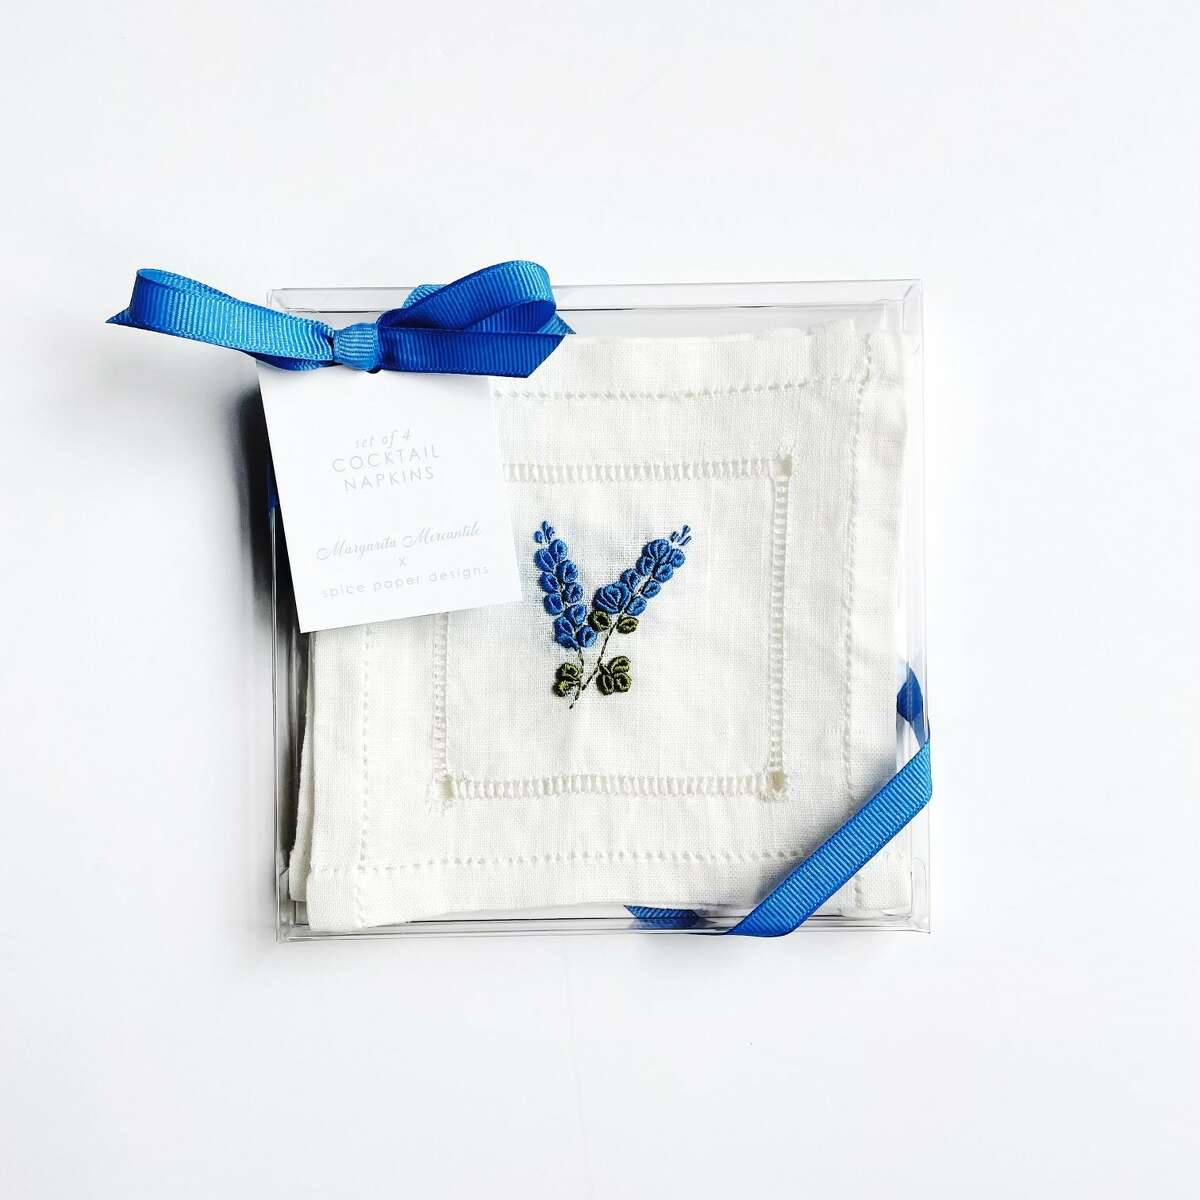 The founders of two Houston brands, Margarita Mercantile and Spice Paper Designs, have collaborated on a set of heirloom-quality linen cocktail napkins.